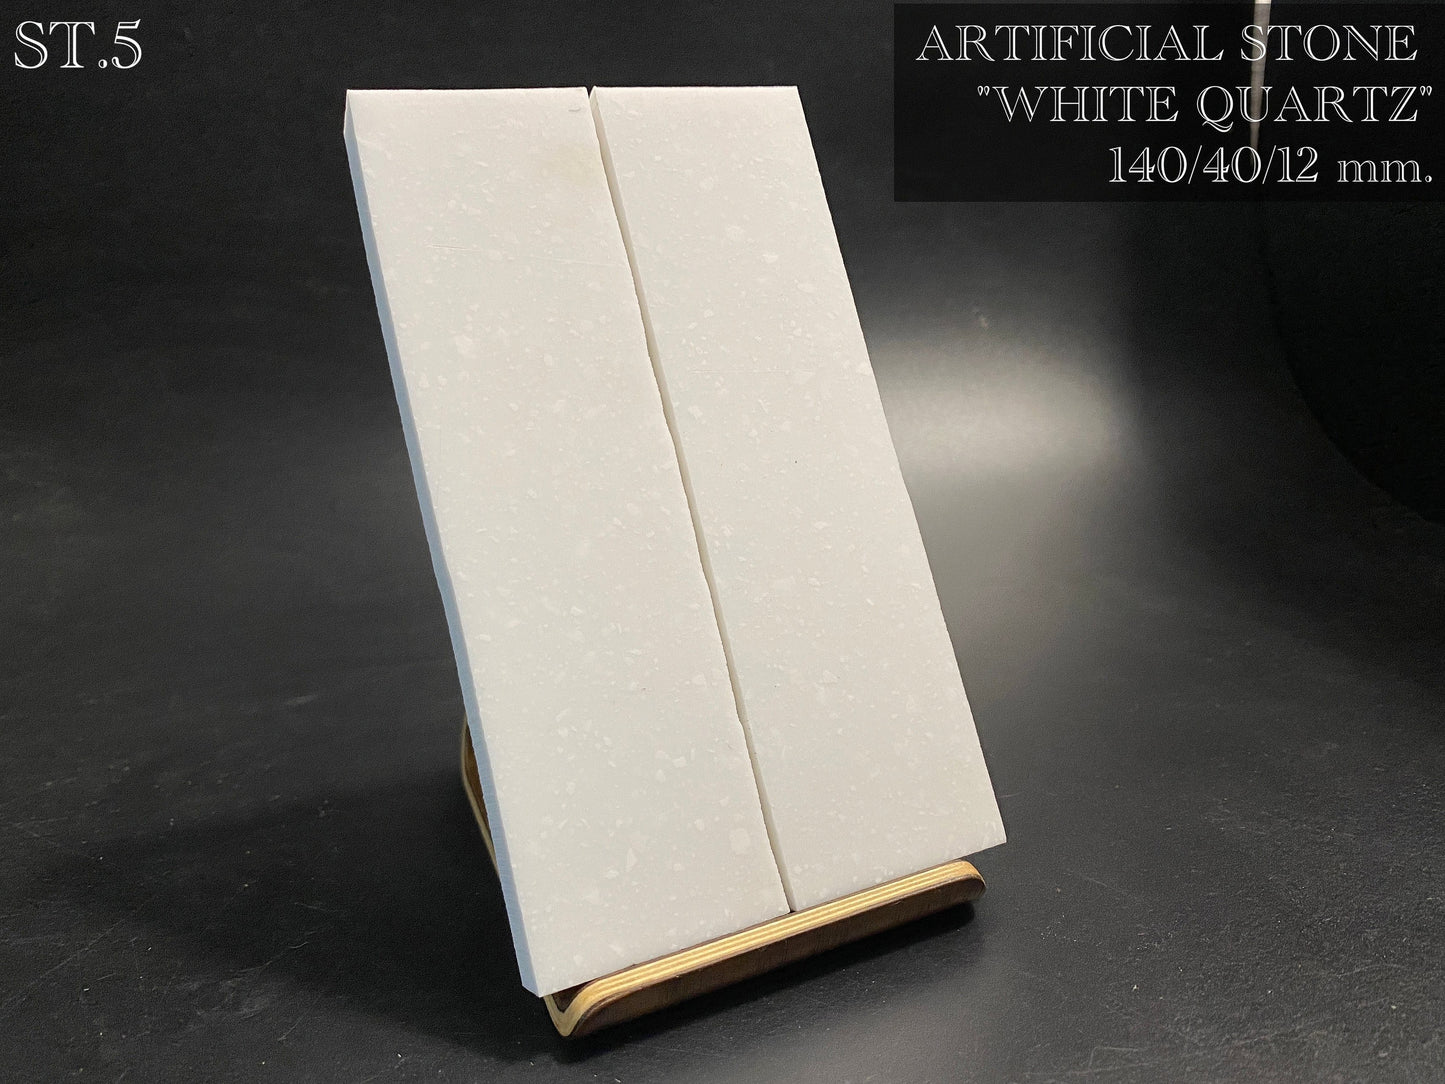 ARTIFICIAL STONE Acrylic, "White Quartz", Paired Blanks for crafting and tools making. #ST.5